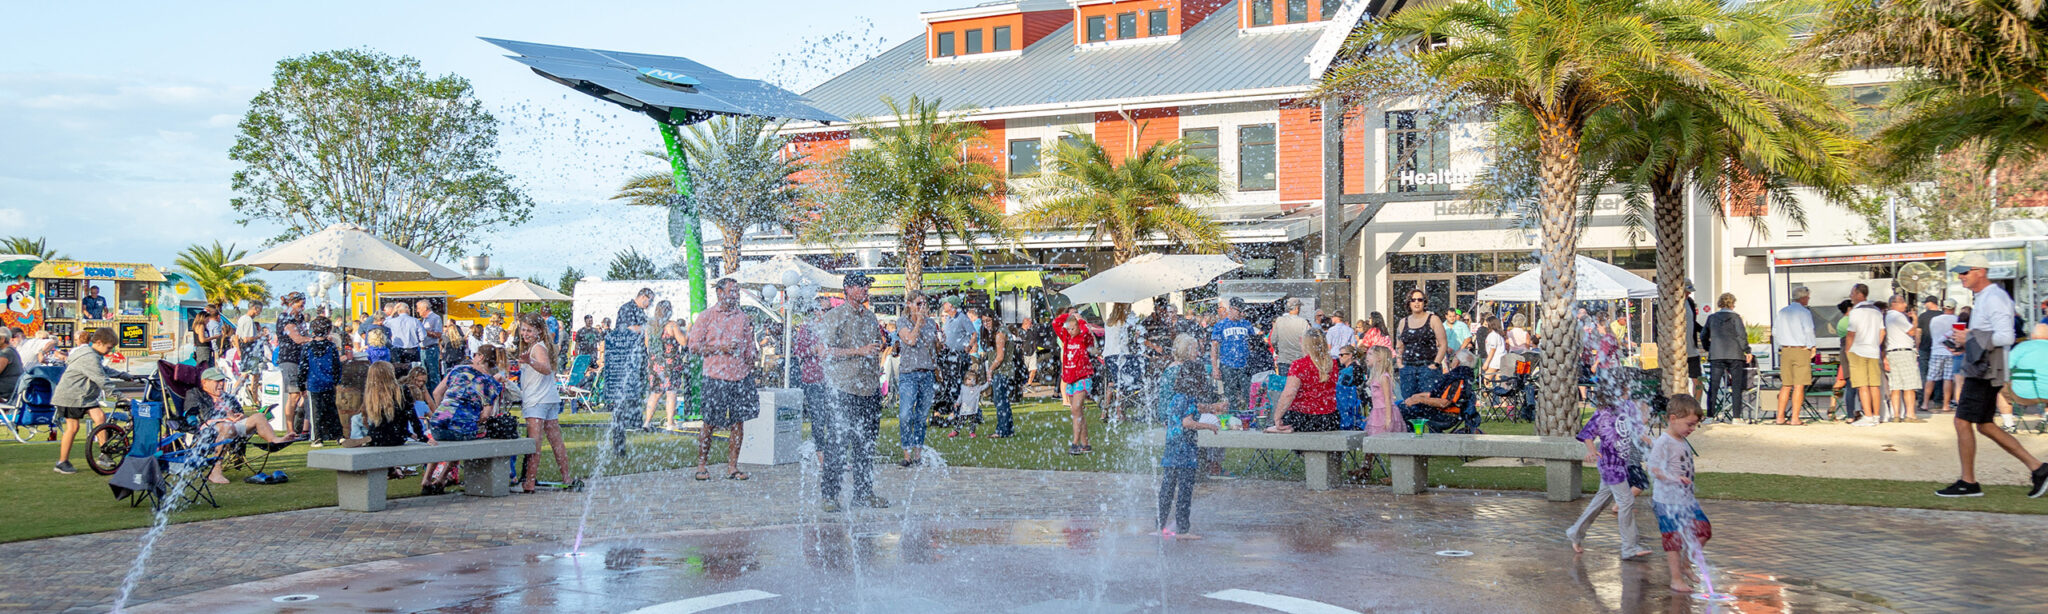 kids playing on splash pad surrounded by people and food trucks at an event